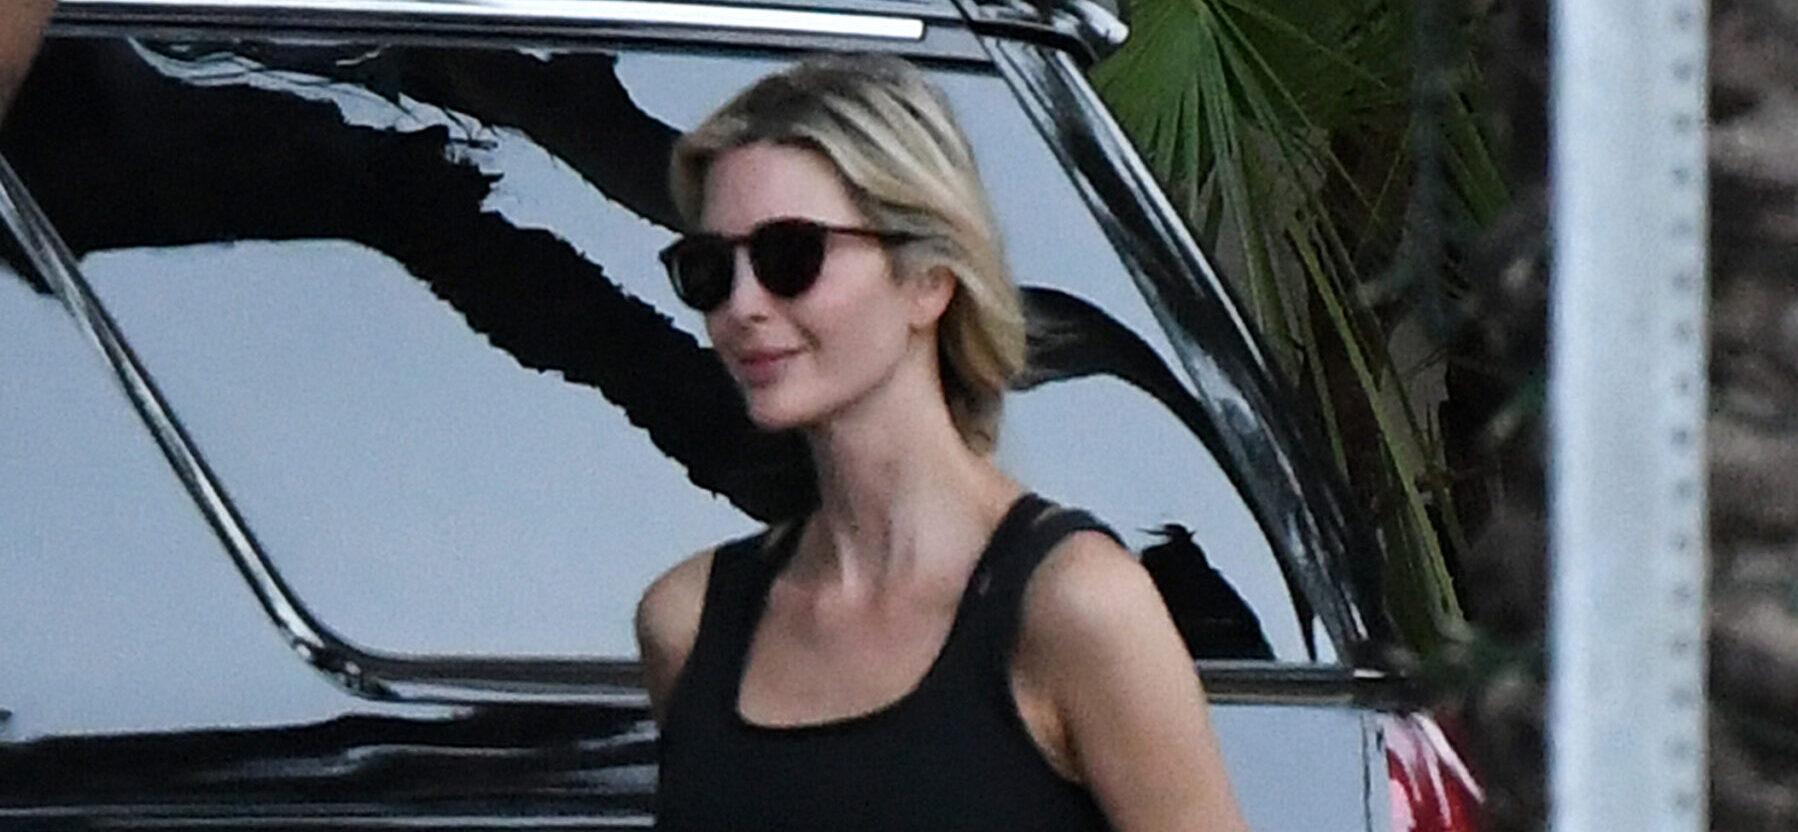 Ivanka Trump is see leaving her Surfside condo dressed in workout gear